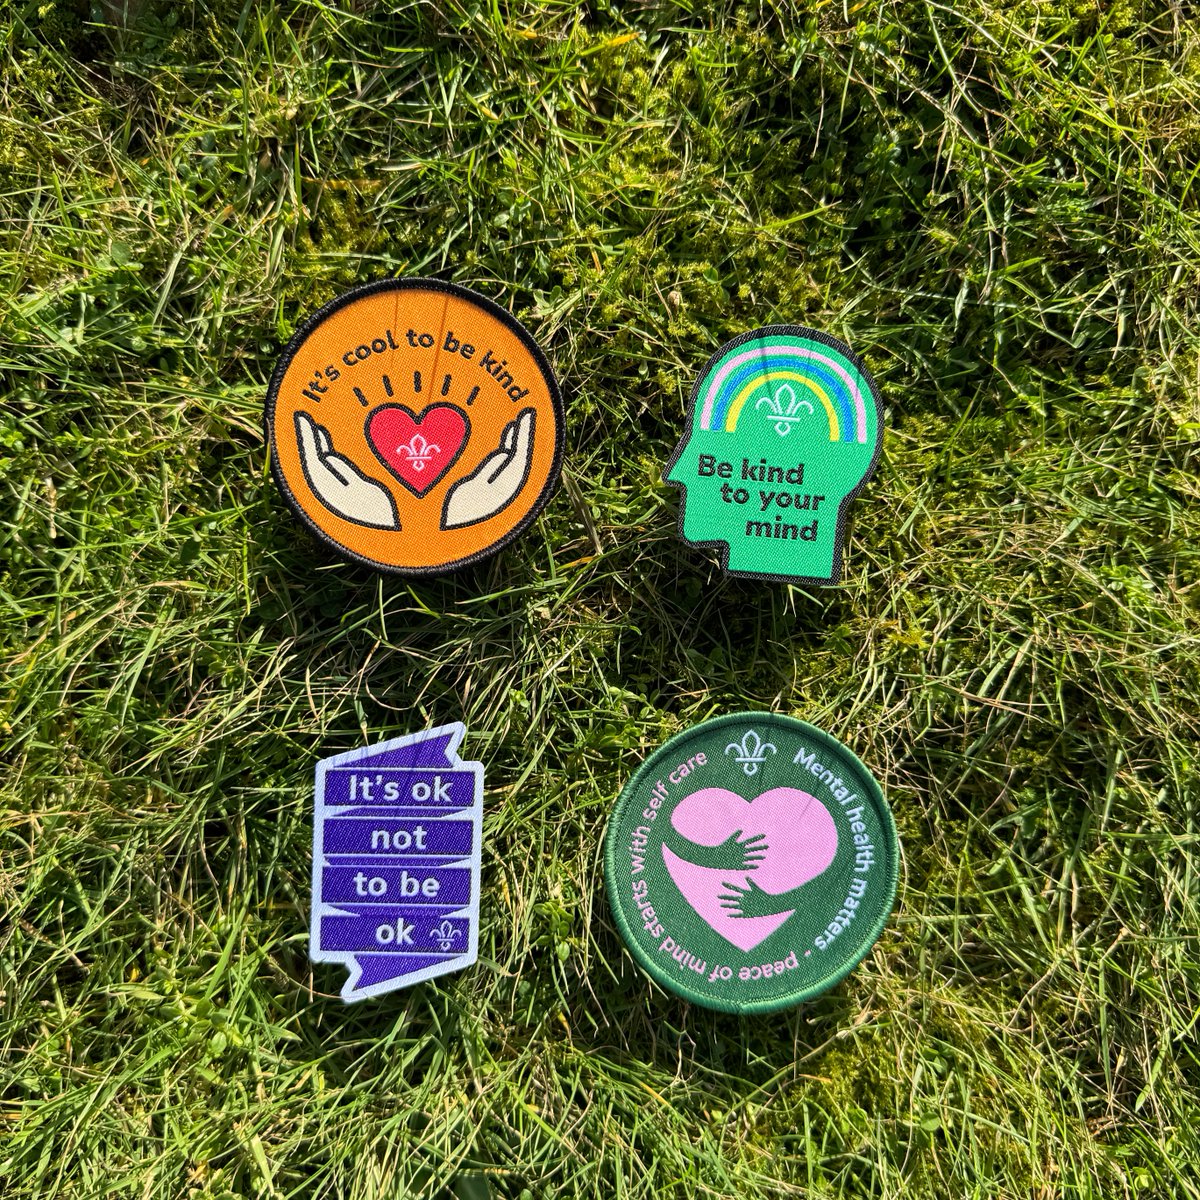 #NationalStressAwarenessMonth Stress affects us all in different ways. We have some beautiful badges that can kickstart discussions on the stress faced by young people🌷 Shop today and make a difference: bit.ly/3IWEdoS